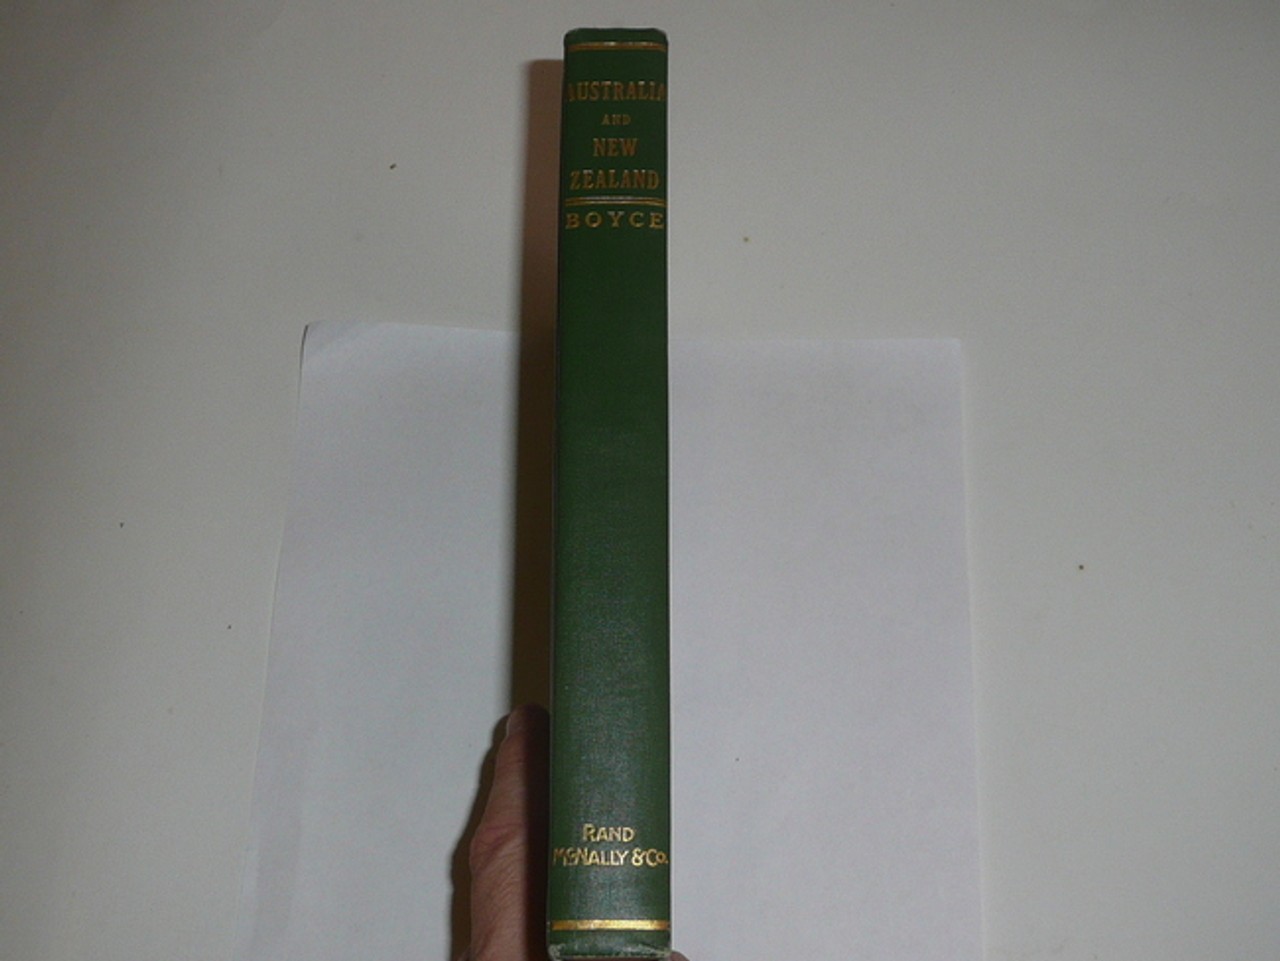 1922 Illustrated Australia and New Zealand, By William D. Boyce, Signed and presented by Author